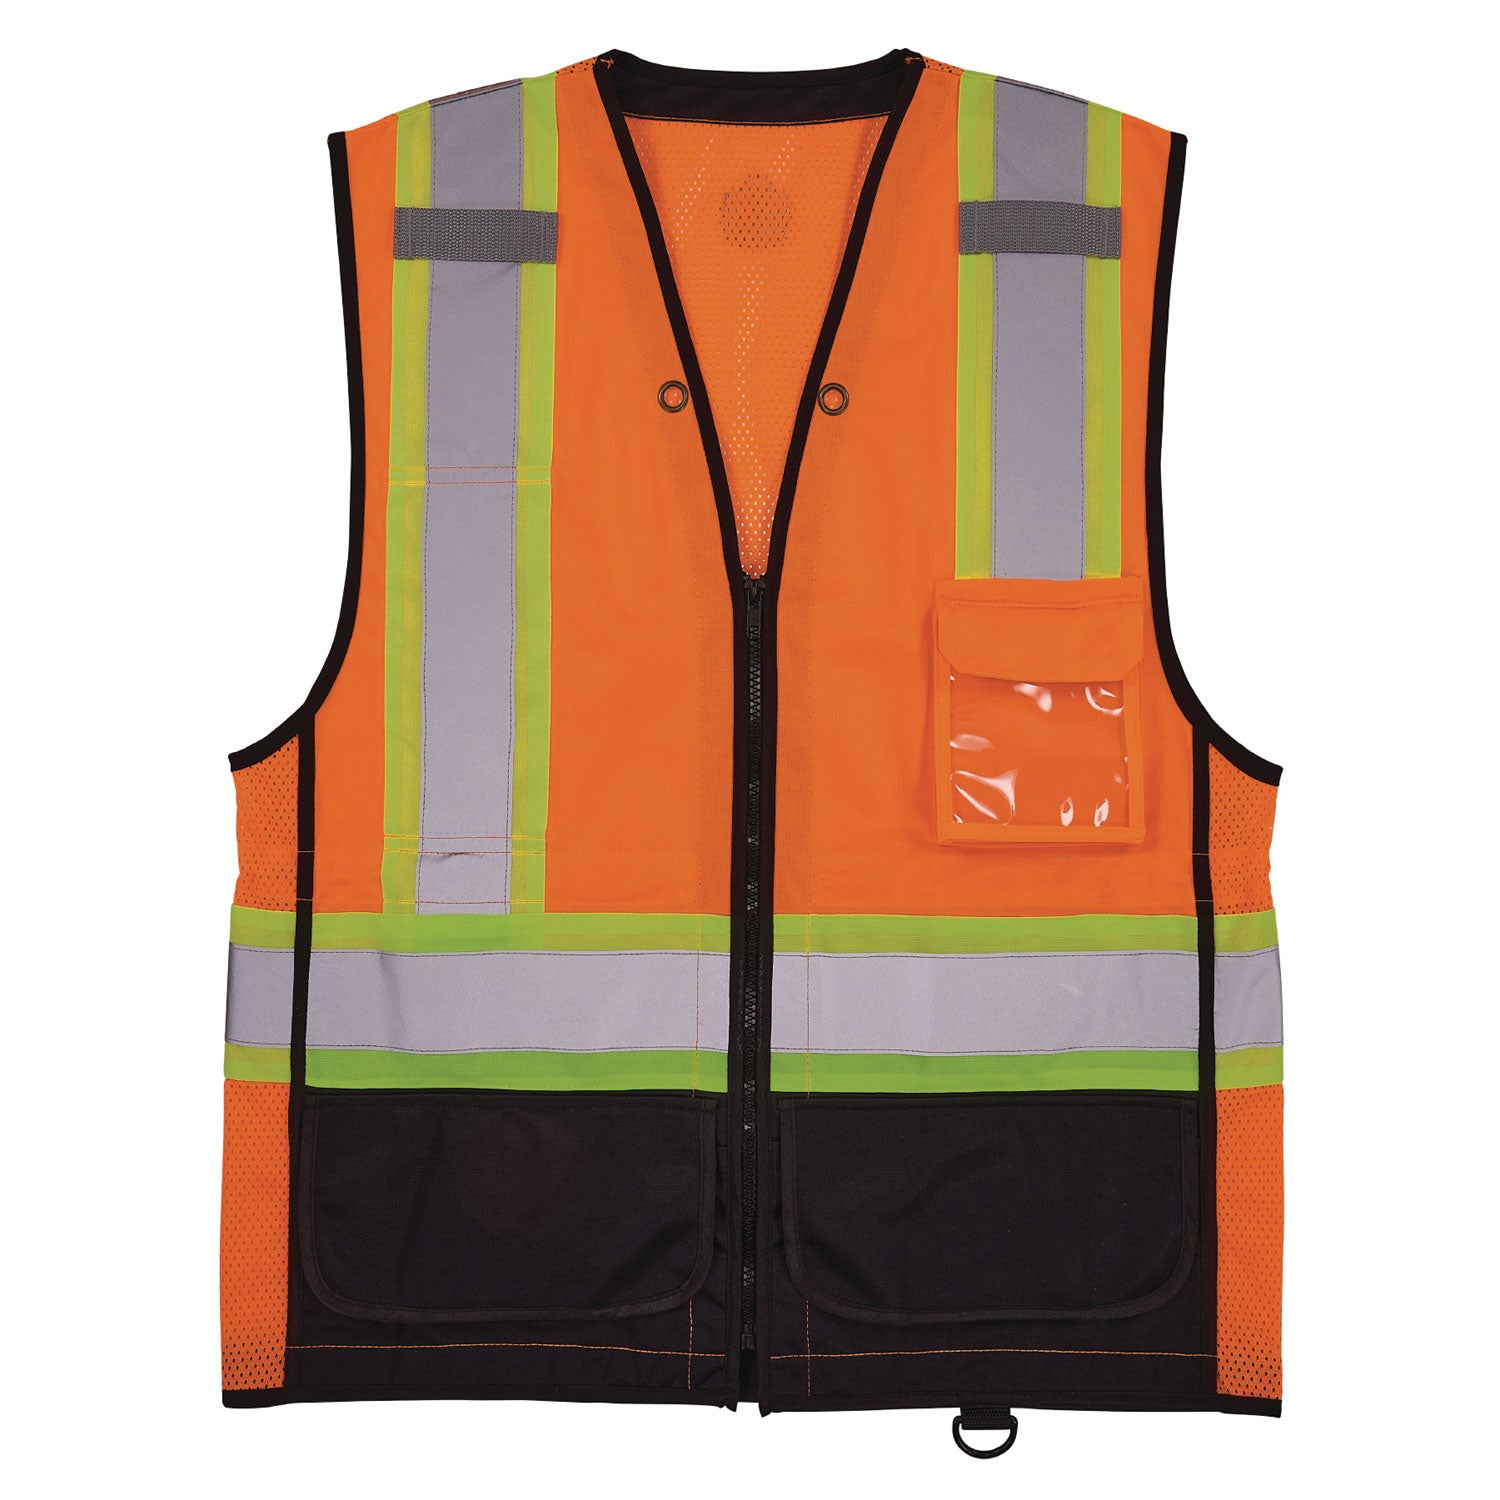 glowear-8251hdz-class-2-two-tone-hi-vis-safety-vest-4x-large-to-5x-large-orange-ships-in-1-3-business-days_ego23049 - 1